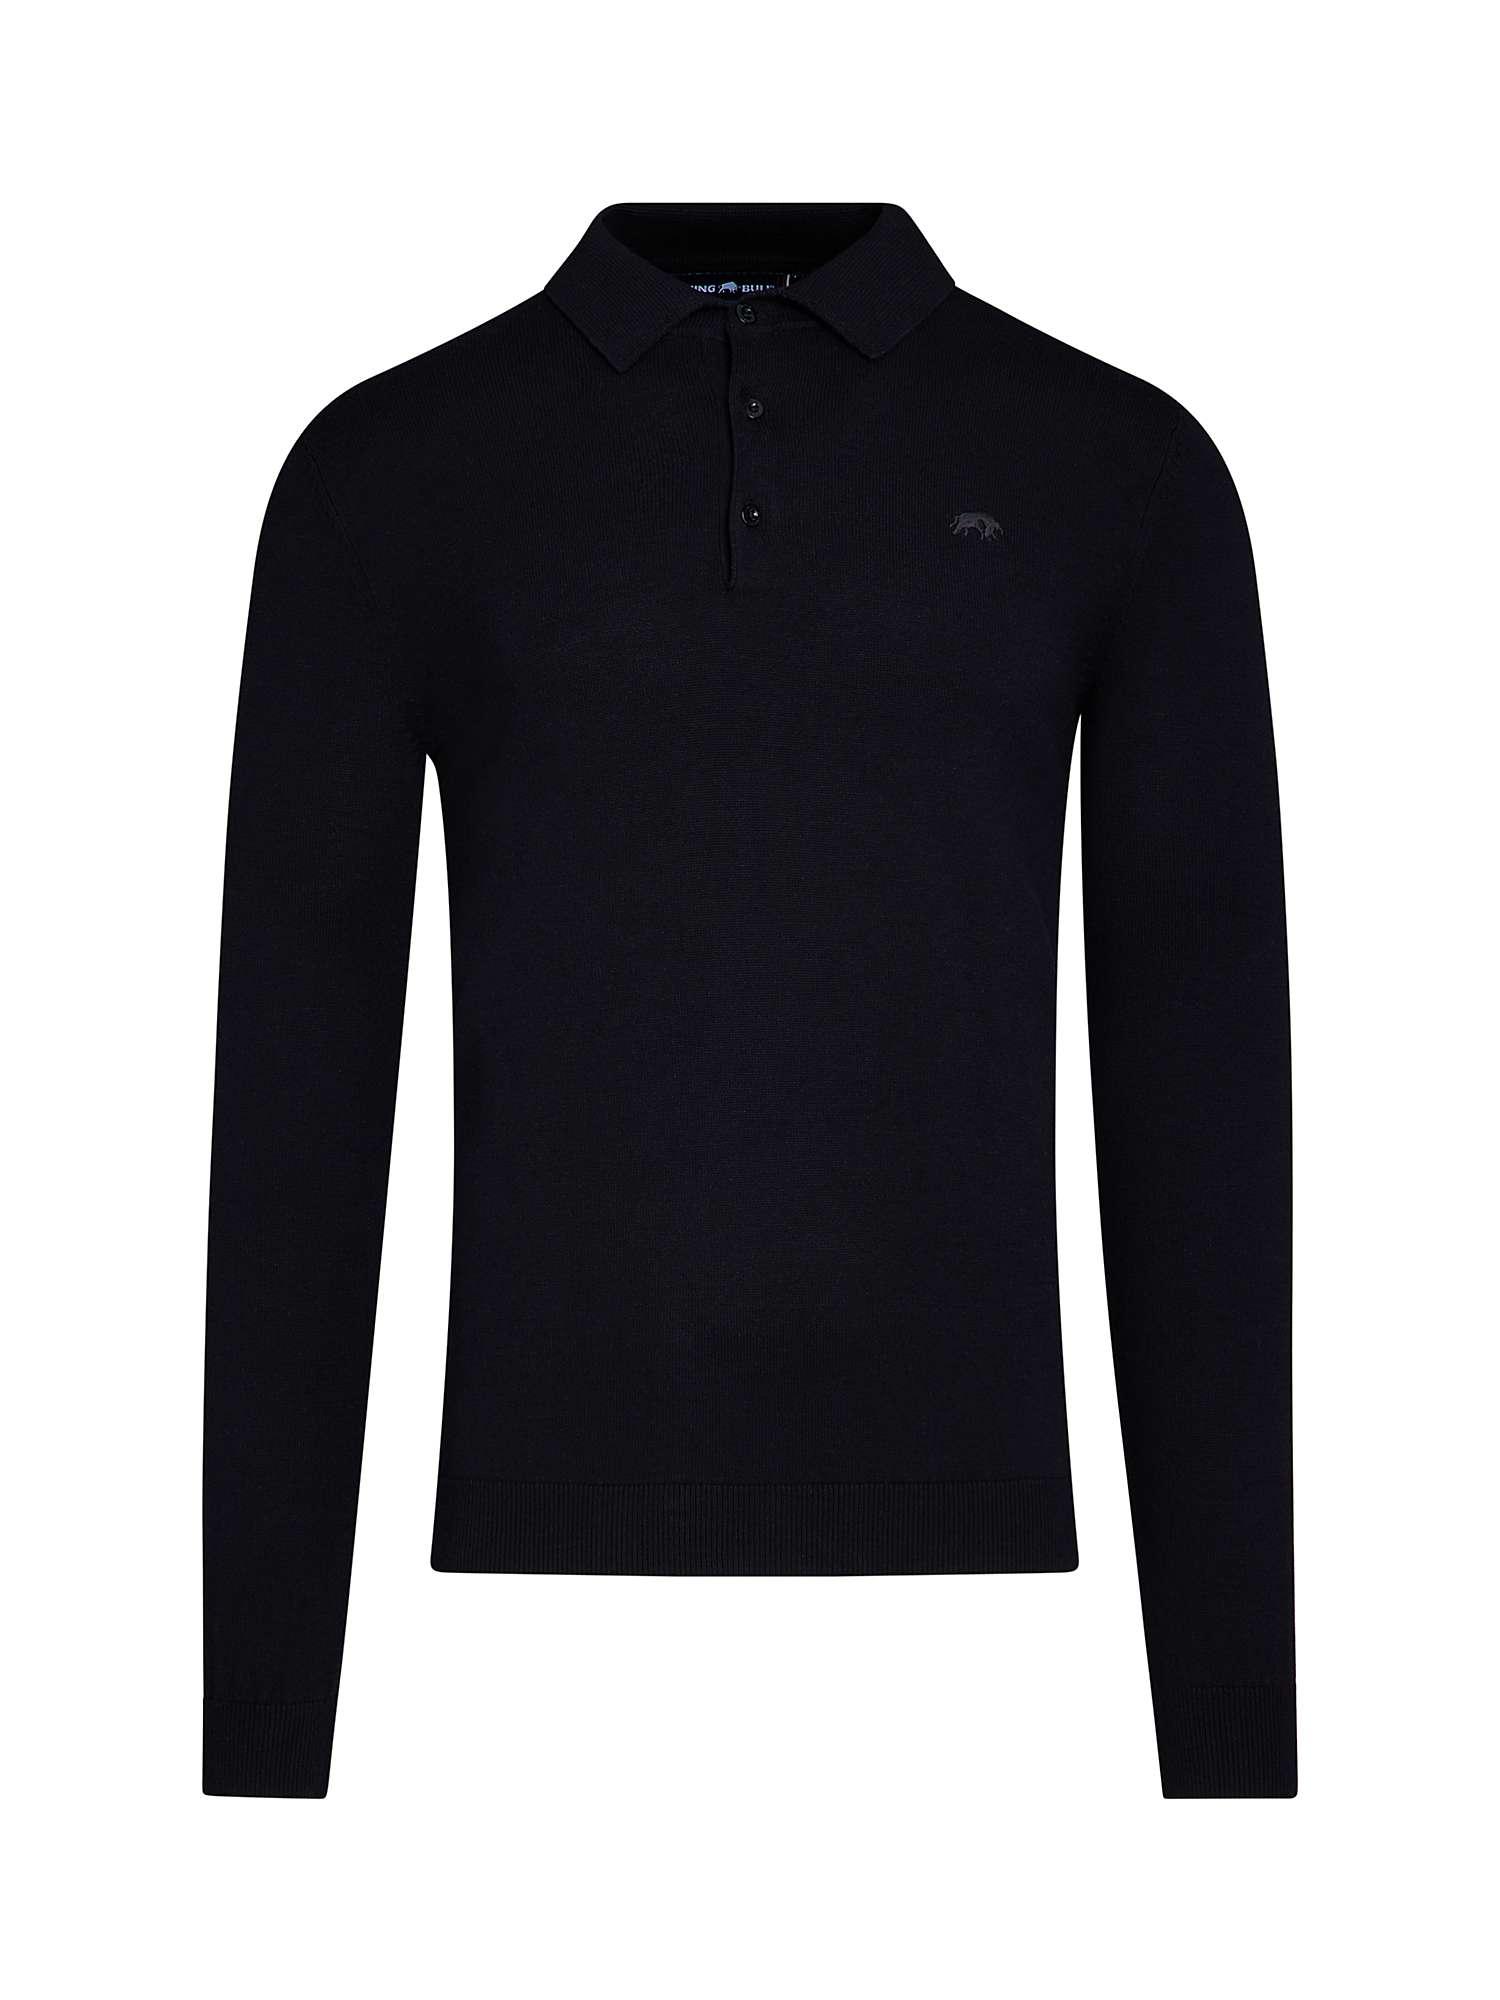 Buy Raging Bull Classic Knitted Long Sleeve Polo Shirt, Black Online at johnlewis.com